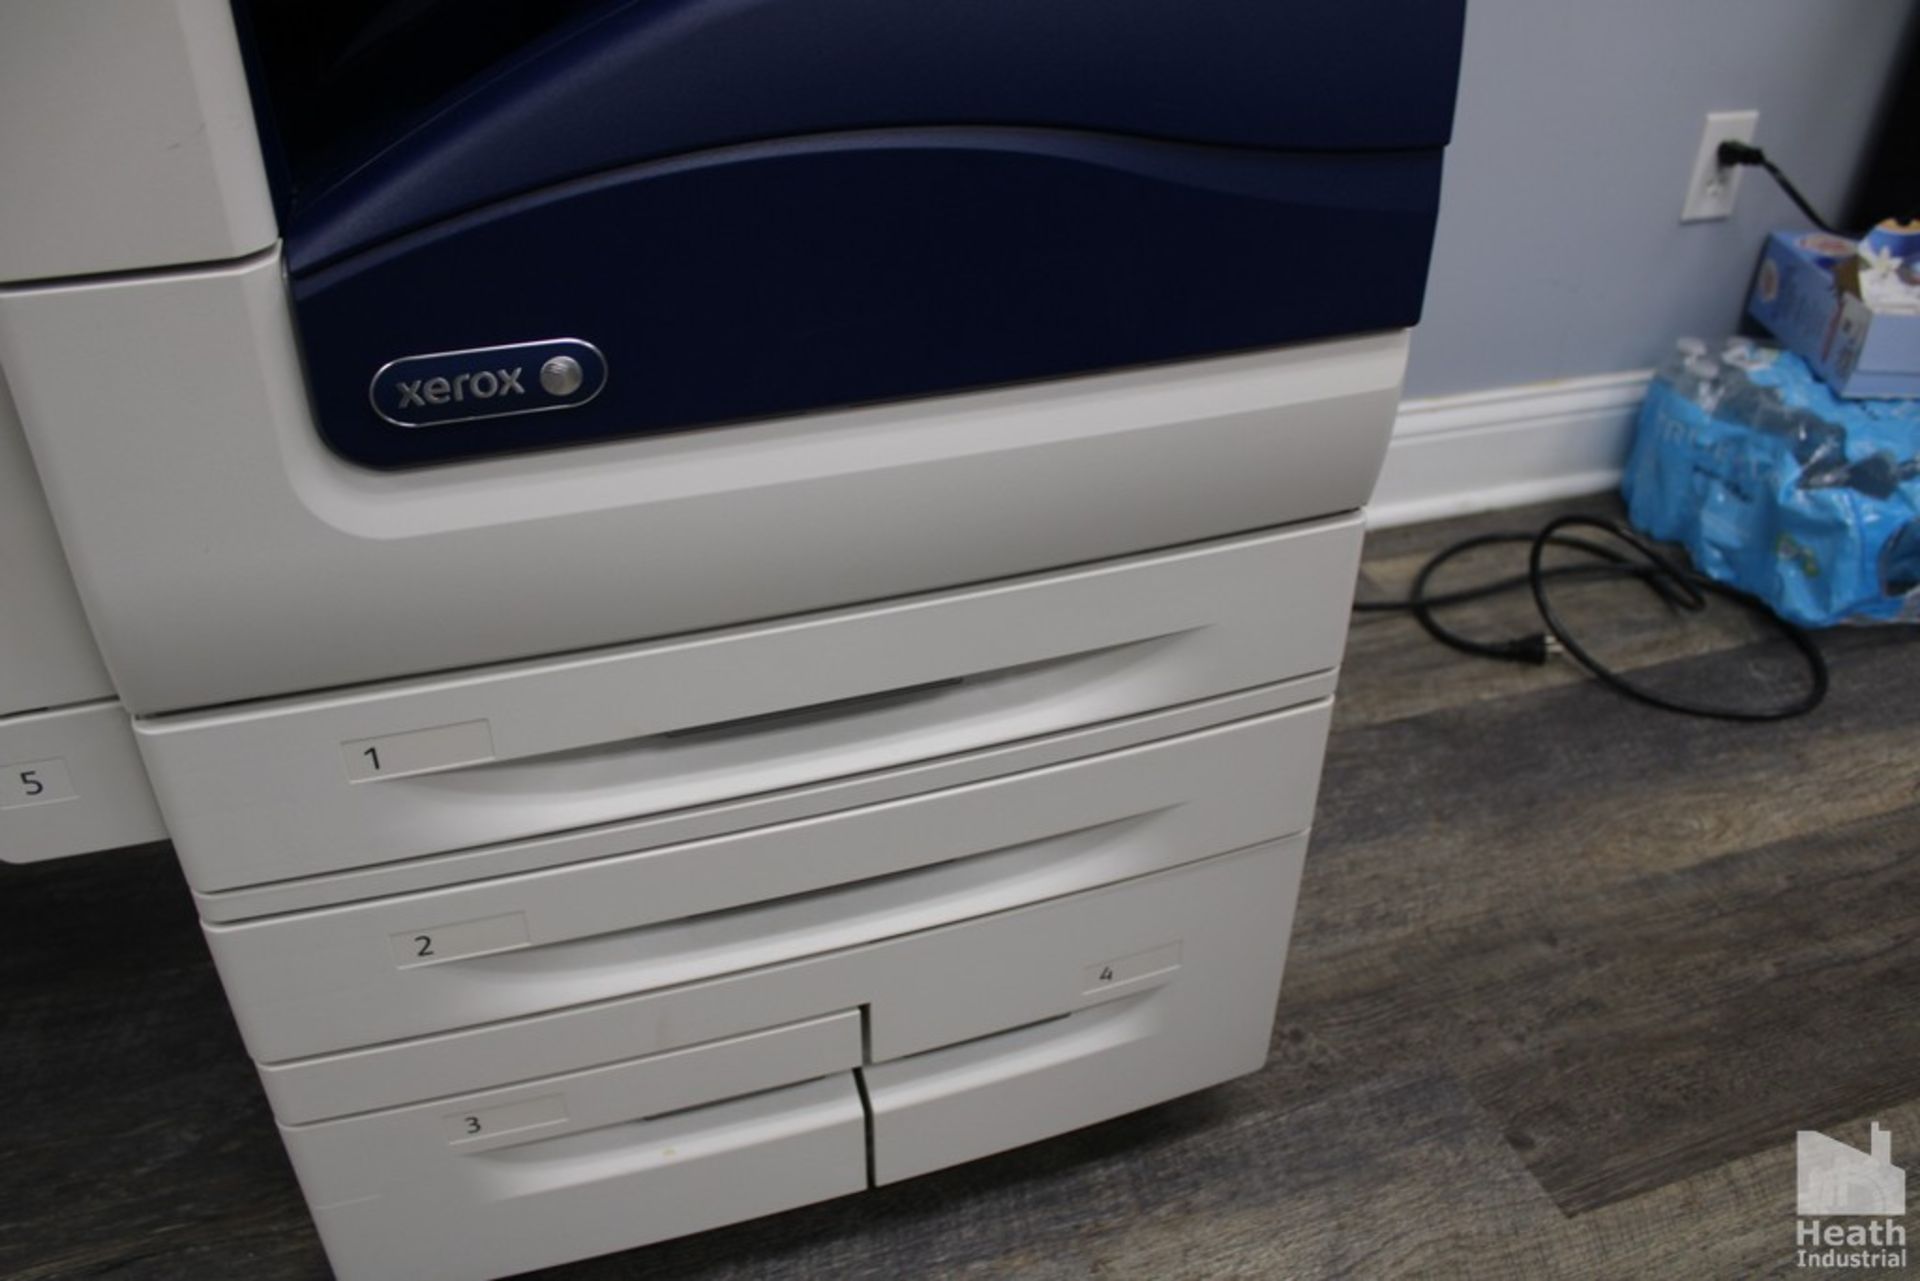 XEROX WORK CENTER 7855 MULTIFUNCTION COLOR COPIER, WITH ADF, PAPER TRAYS, ETC. - Image 2 of 3